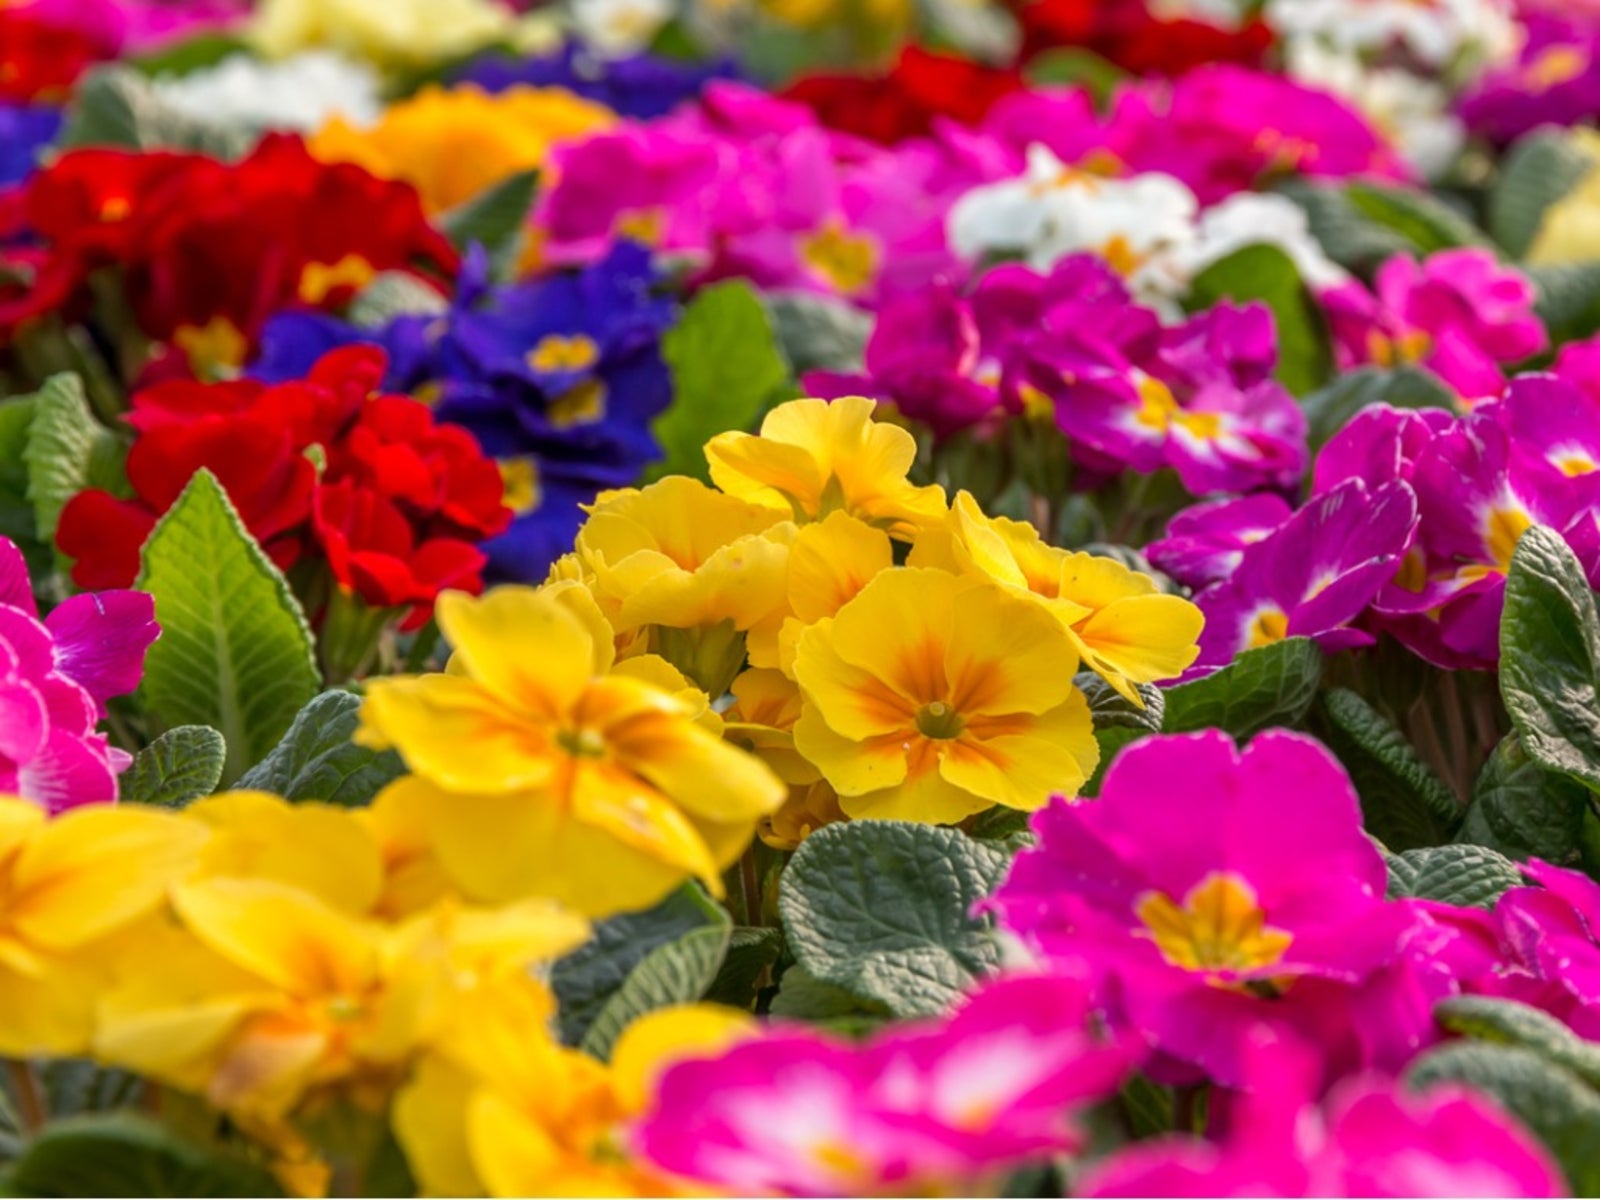 Gardening Problems About And - With Primroses Pests | Know Learn Problems How Primula Disease